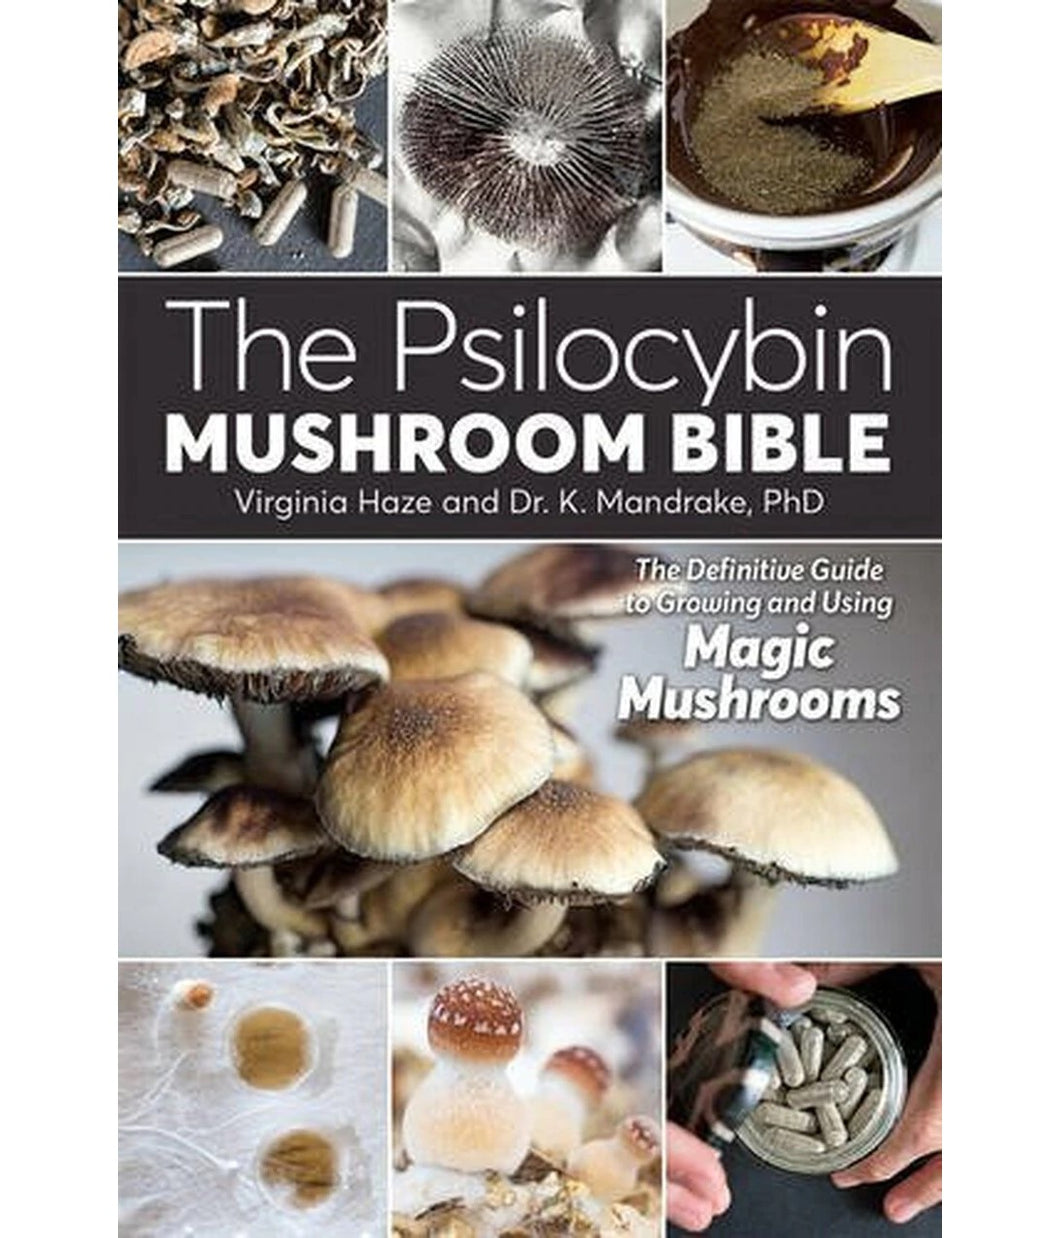 Psilocybin Mushroom Bible: The Definitive Guide to Growing and Using Magic Mushrooms by Dr. K Mandrake